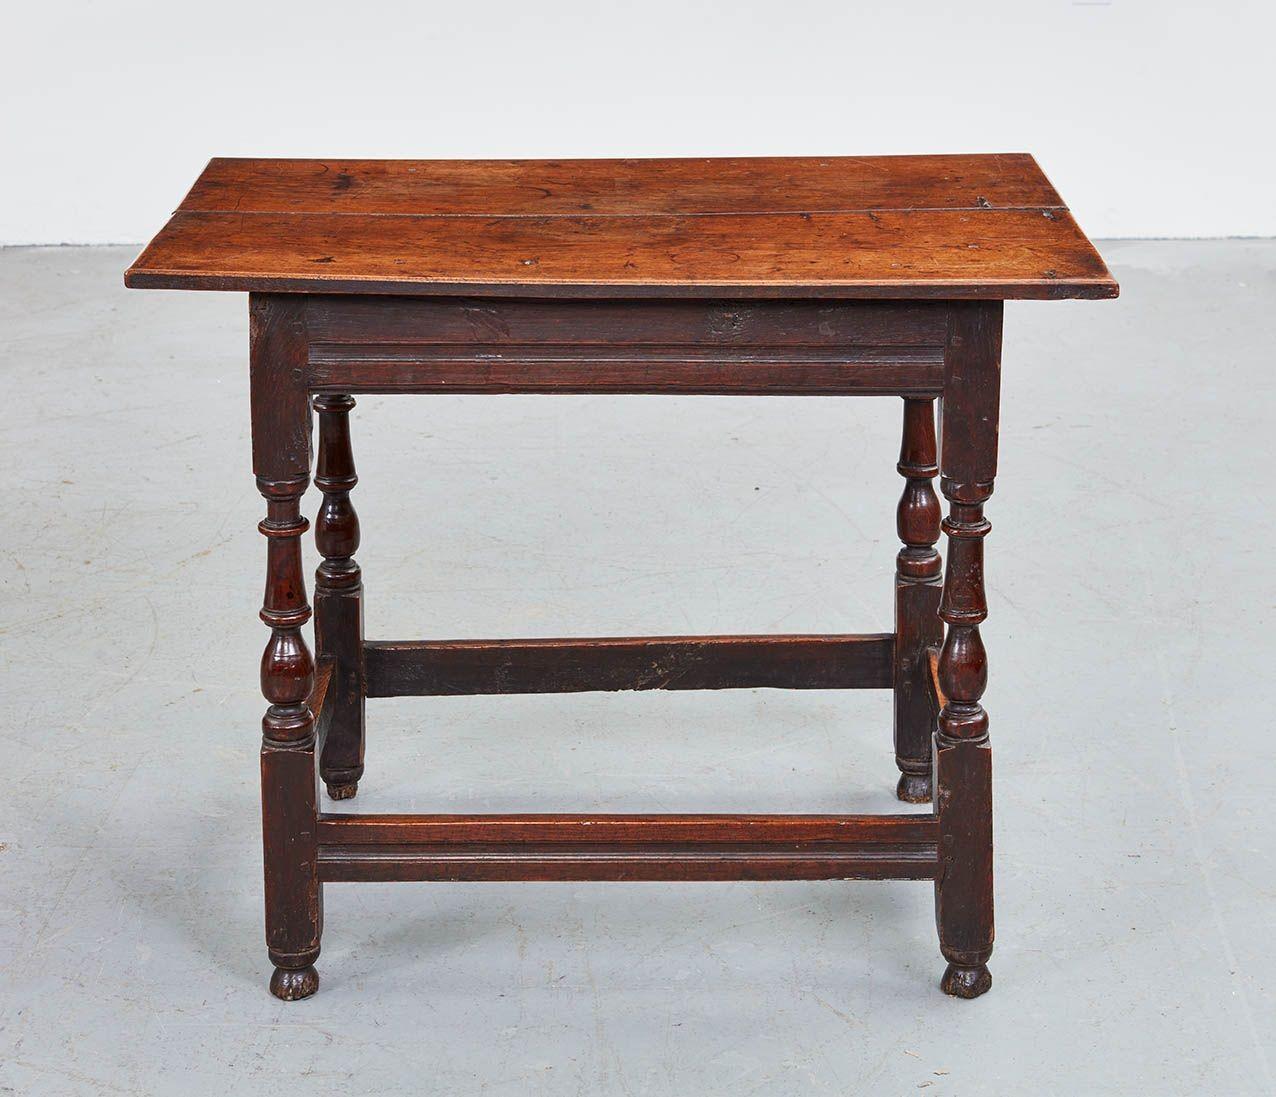 An early 18th century English oak center table with good color having two plank top over baluster turned legs joined by deep rectangular section profiled box stretcher.